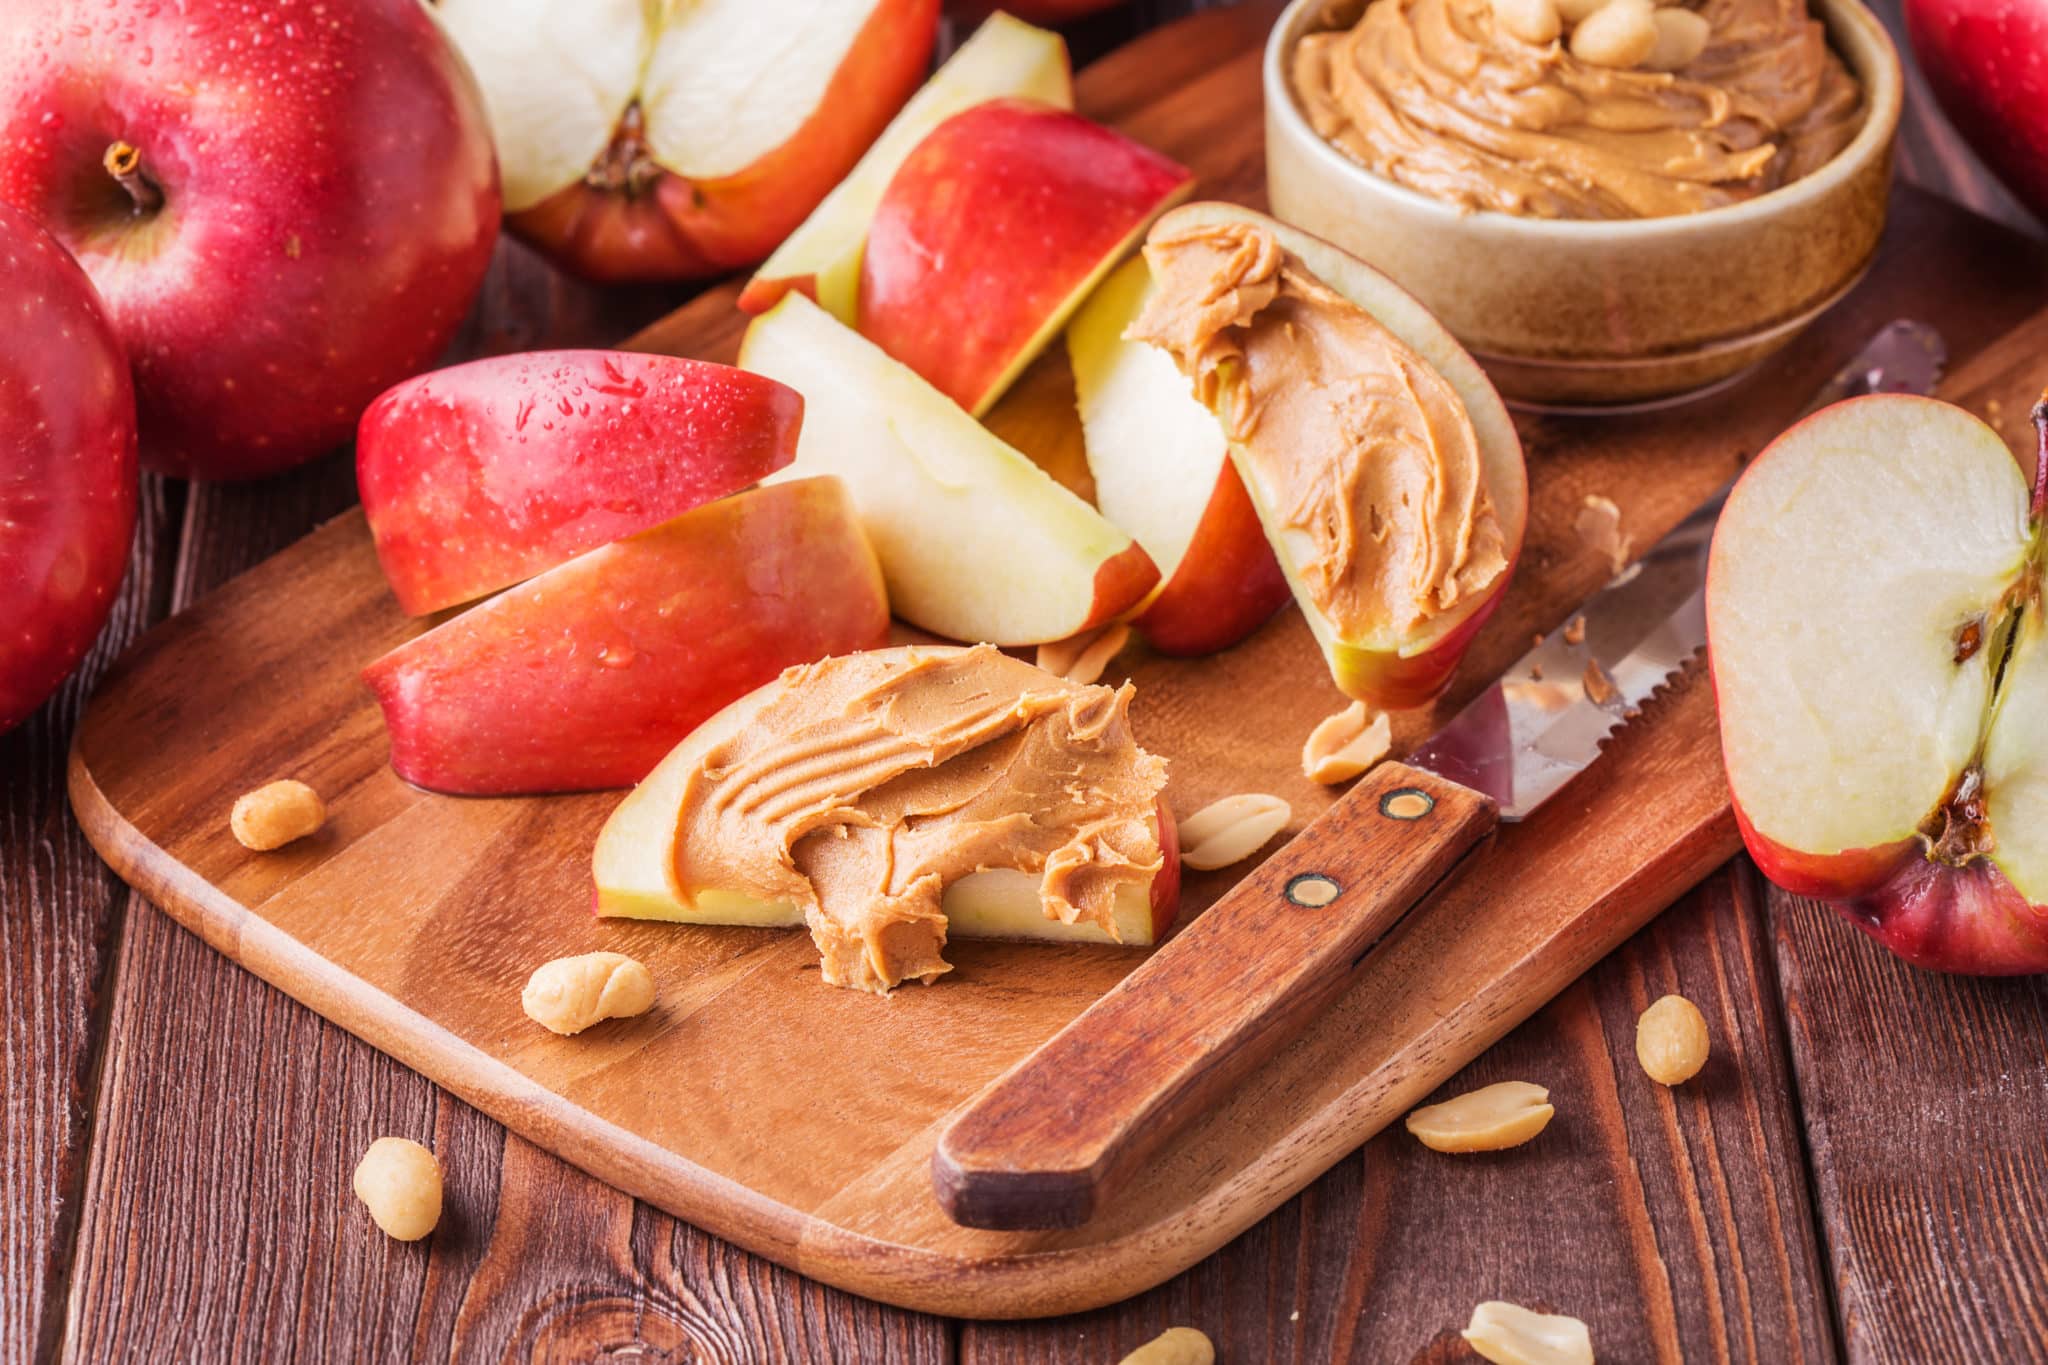 Sliced apples with peanut butter on cutting board with knife